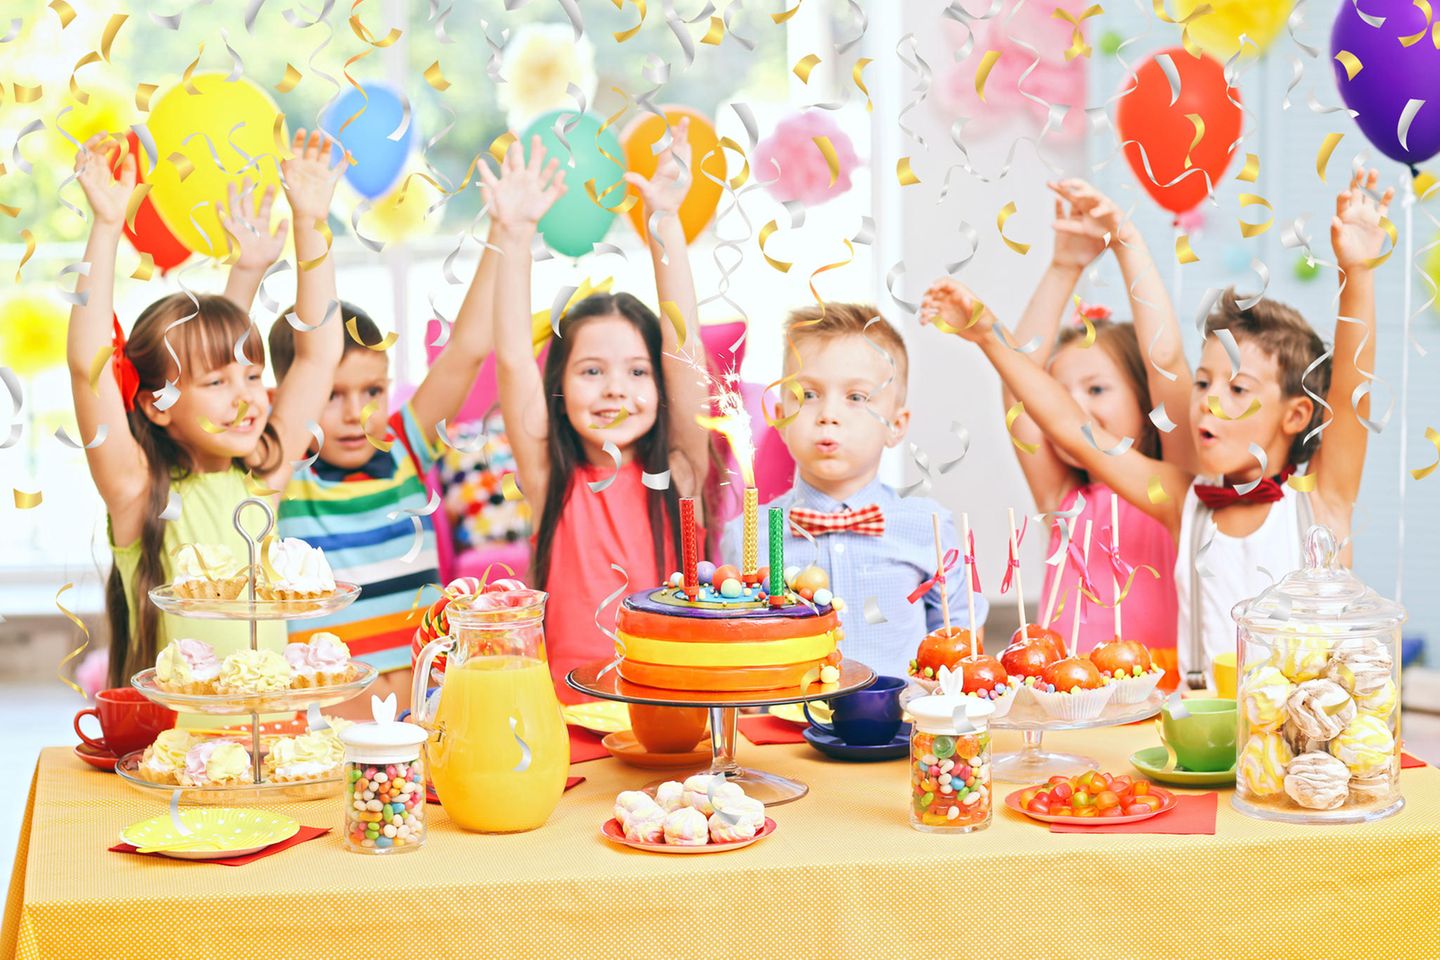 Police dissolve children's birthday party with 30 people